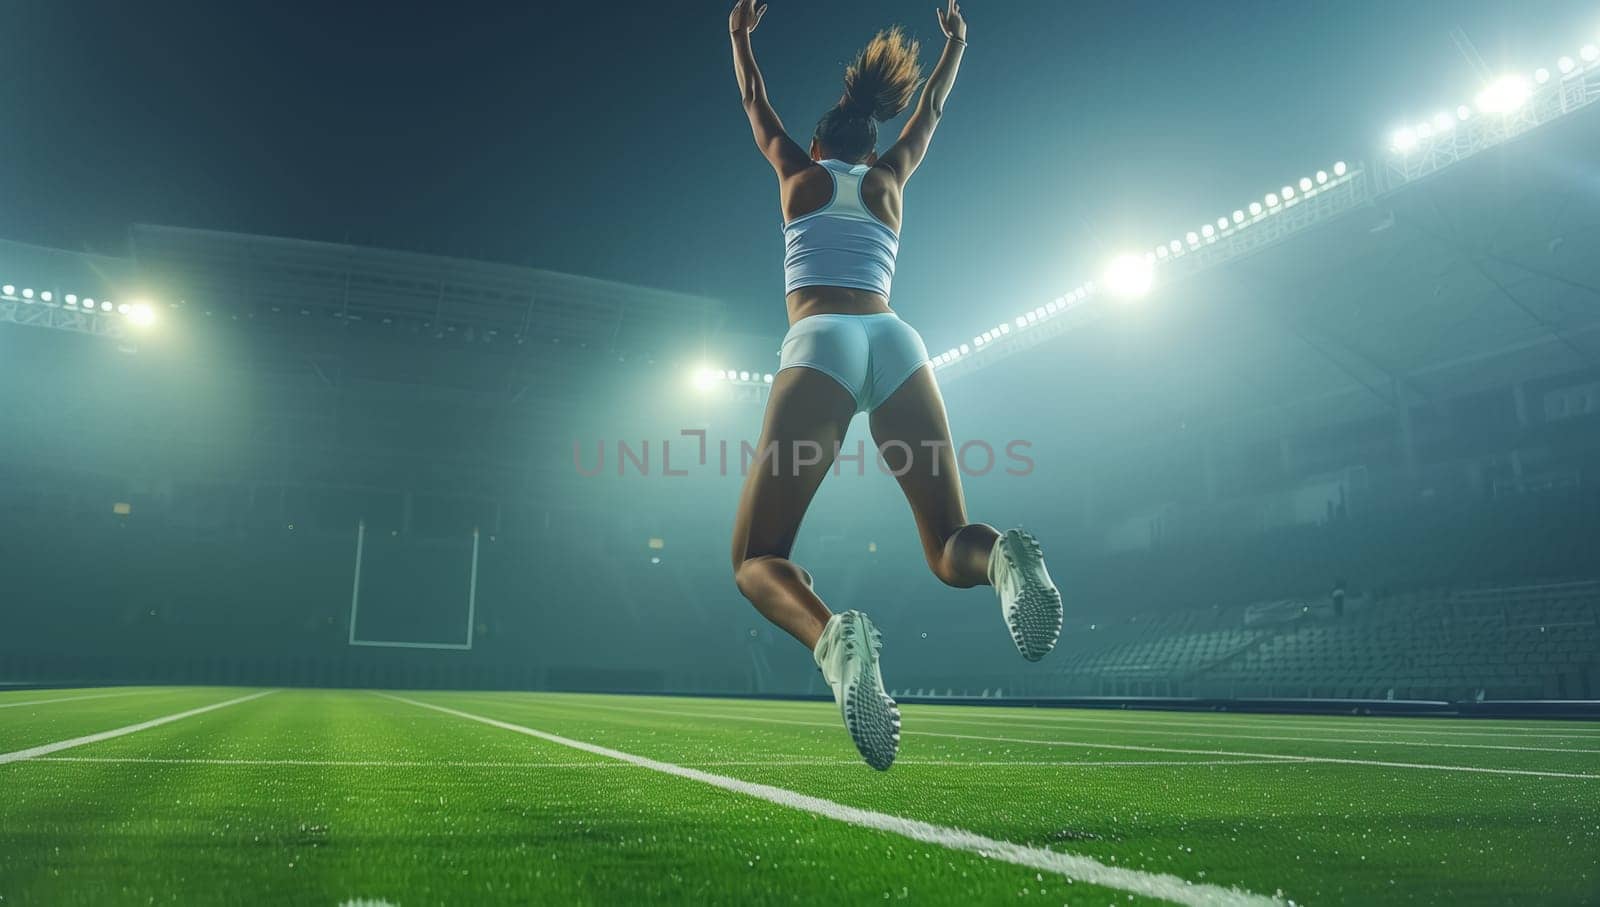 A female soccer player is leaping on the grassy field, showcasing her skills and dedication to the sport in a competitive event